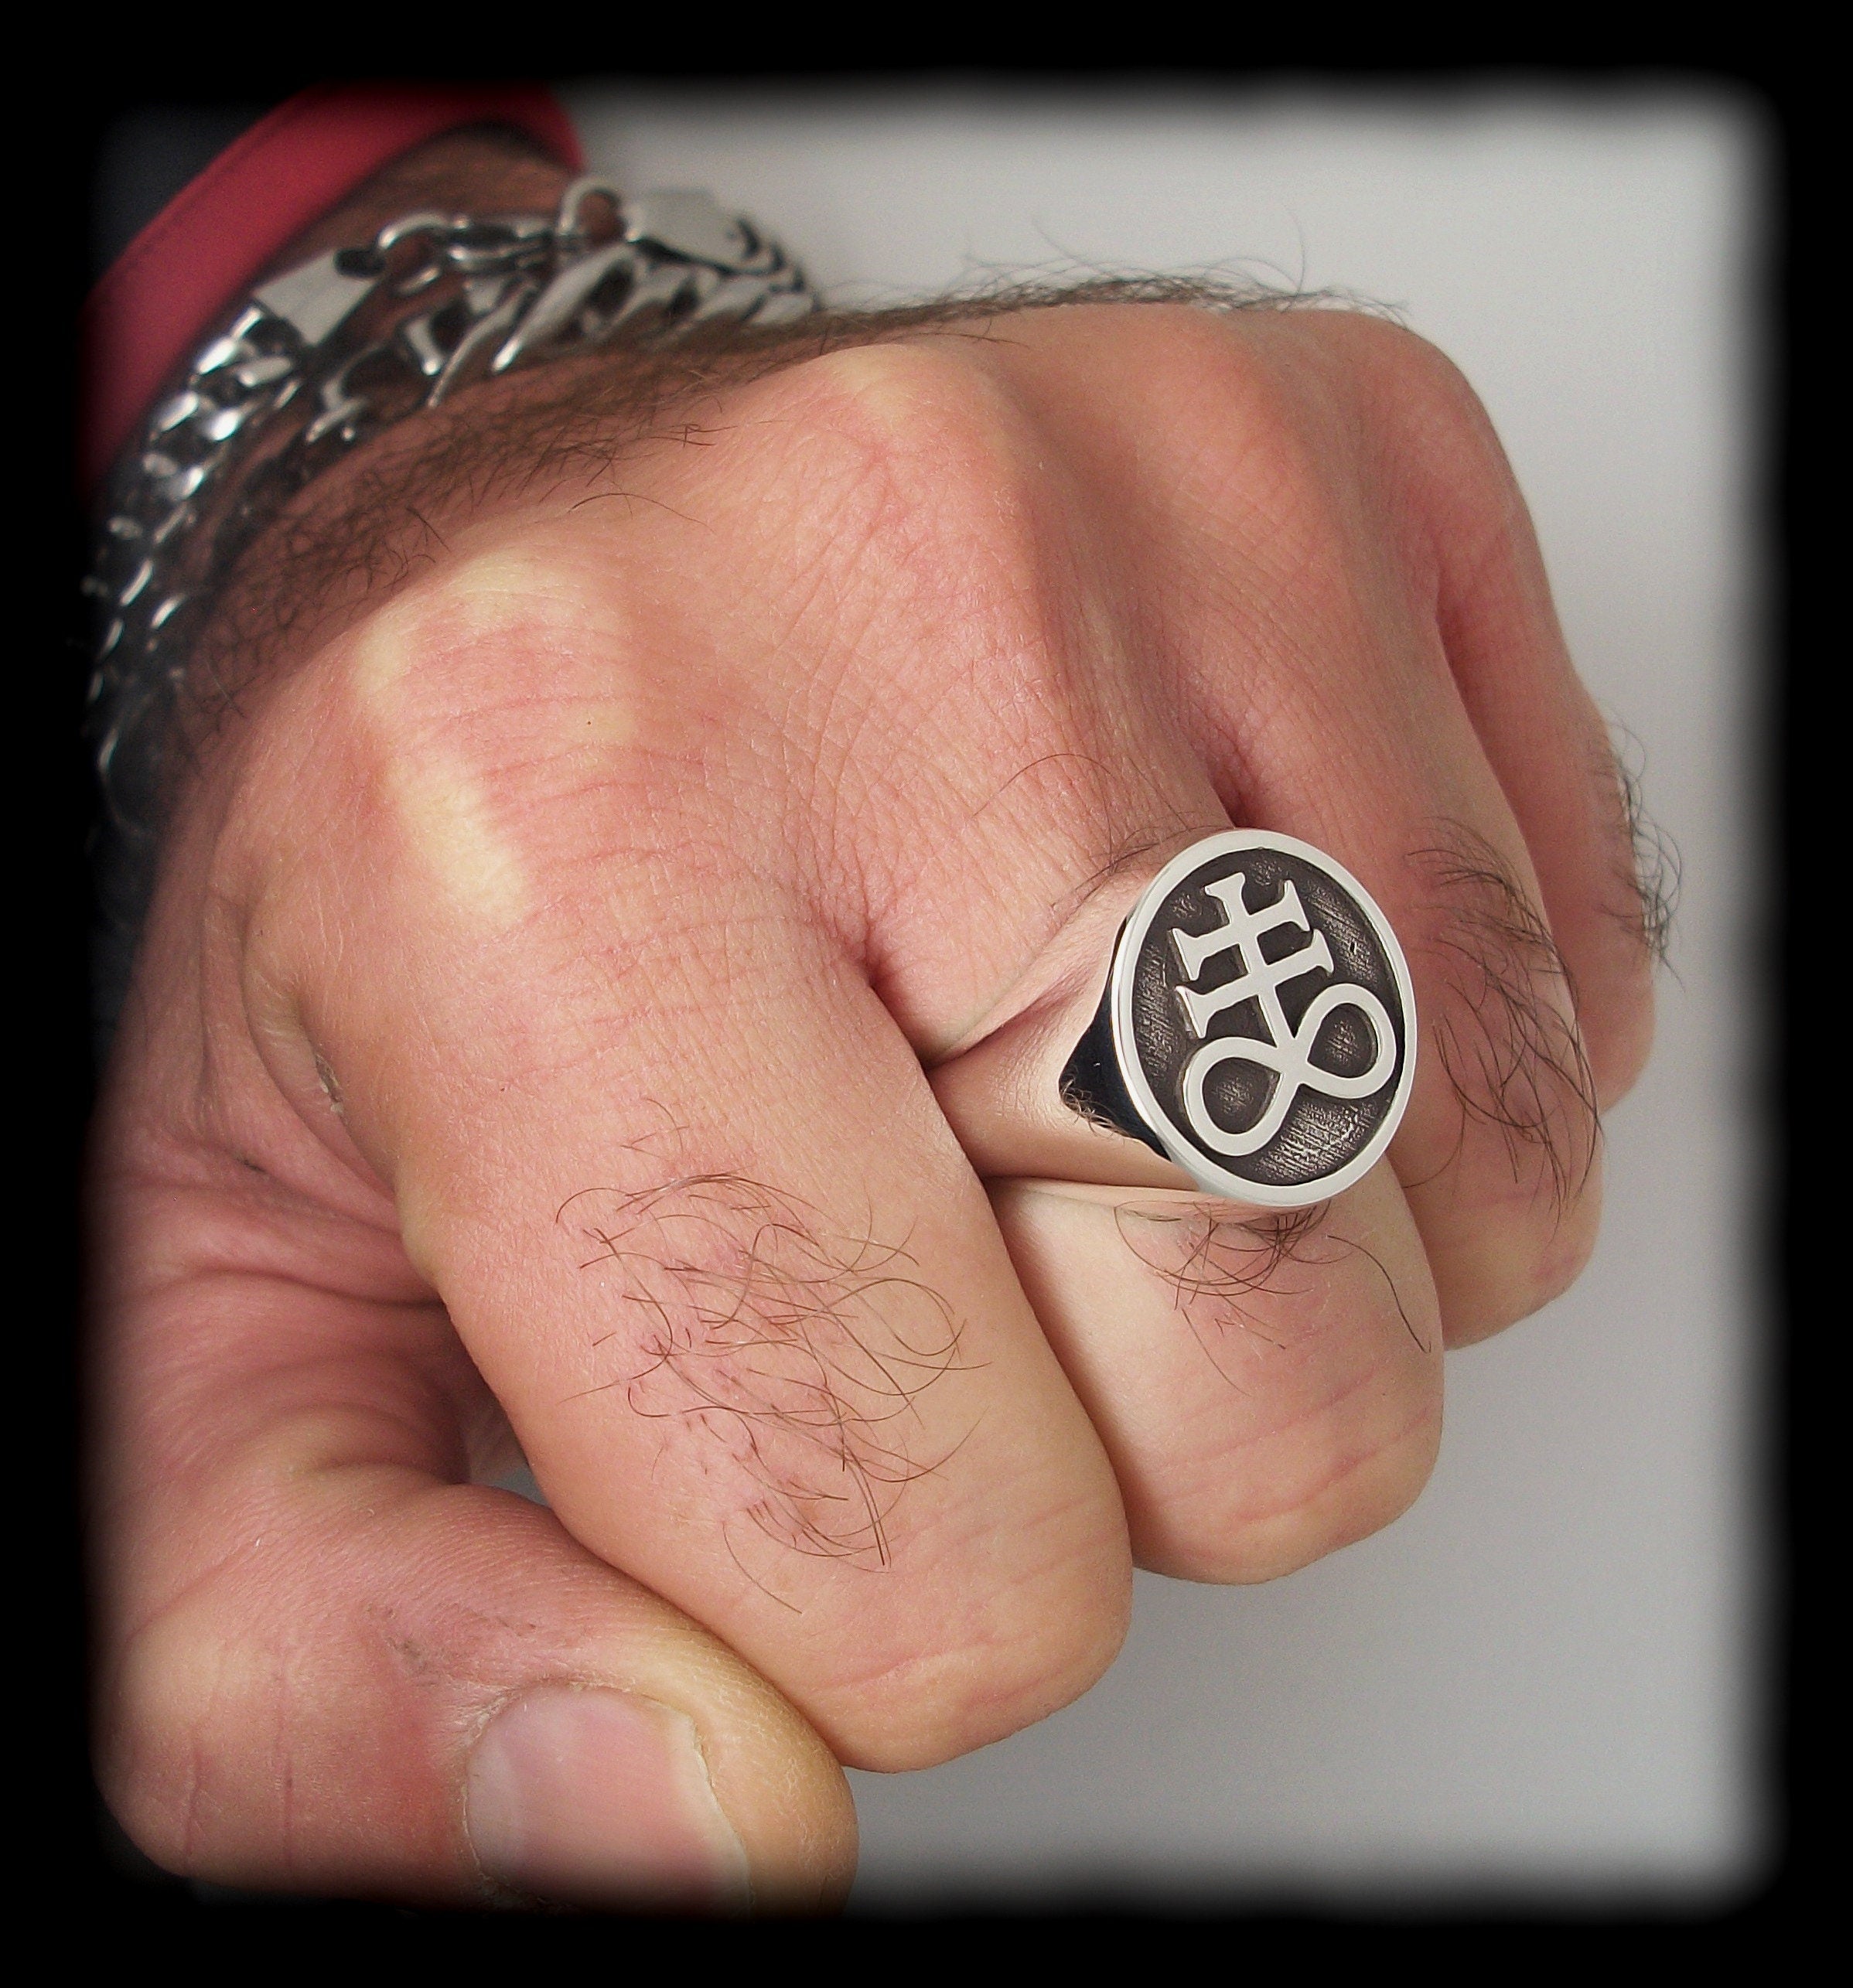 Brimstone ring - Sterling Silver Brimstone Ring - ALL SIZES - Leviathan Cross